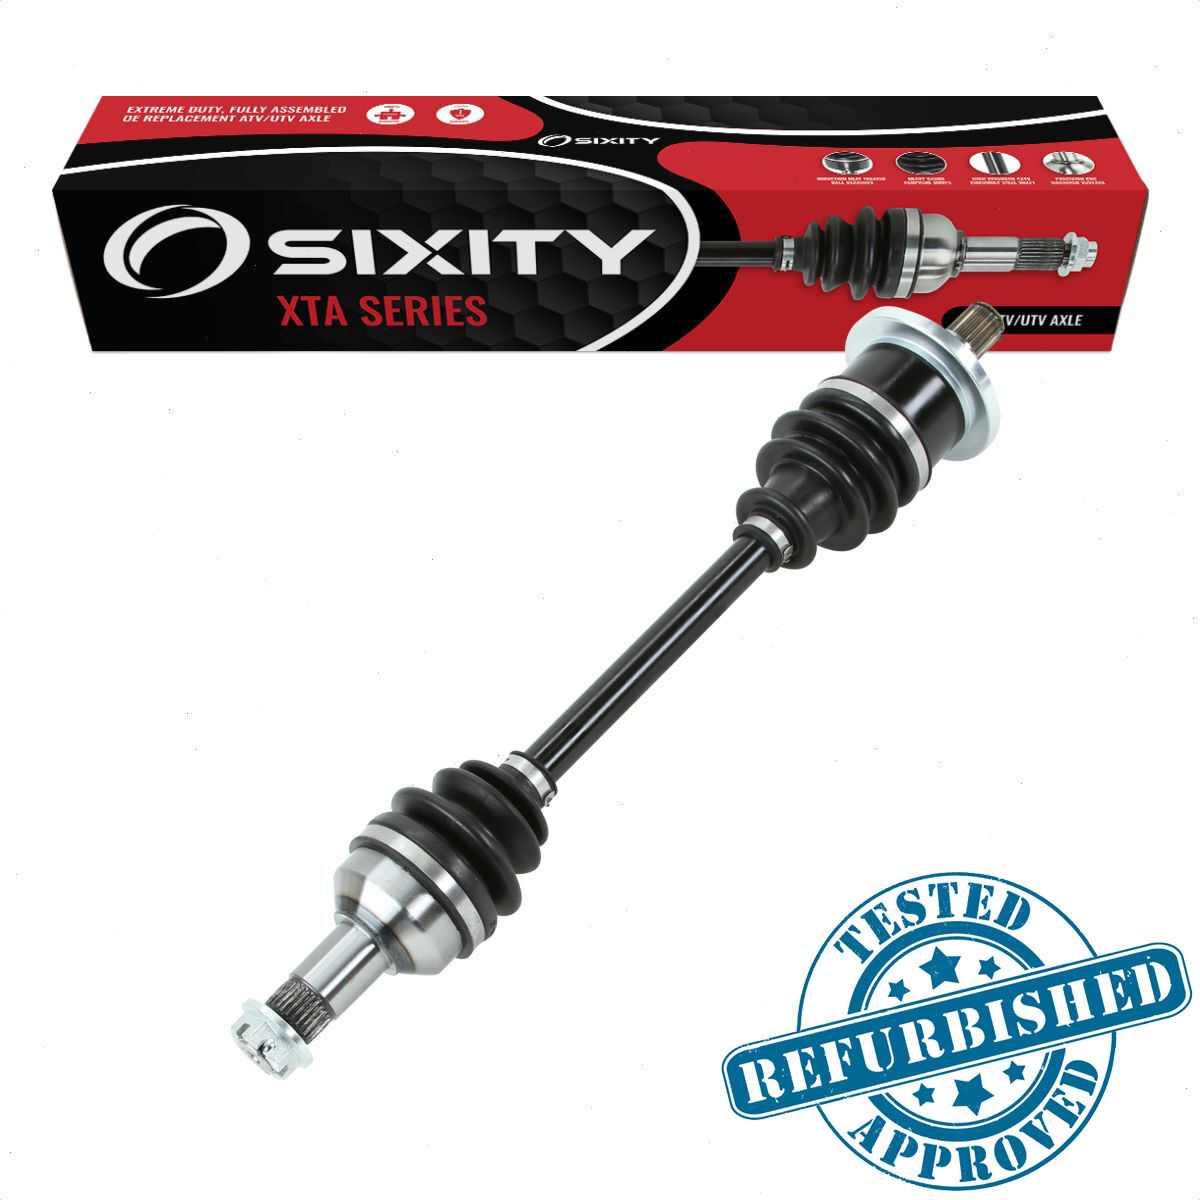 Sixity XTA Refurbished Front Right Axle for 2006-2014 Arctic Cat 1000 EFI H2 4x4 Auto Mud Pro TRV Cruiser 400 LE TBX Plus 450 H1